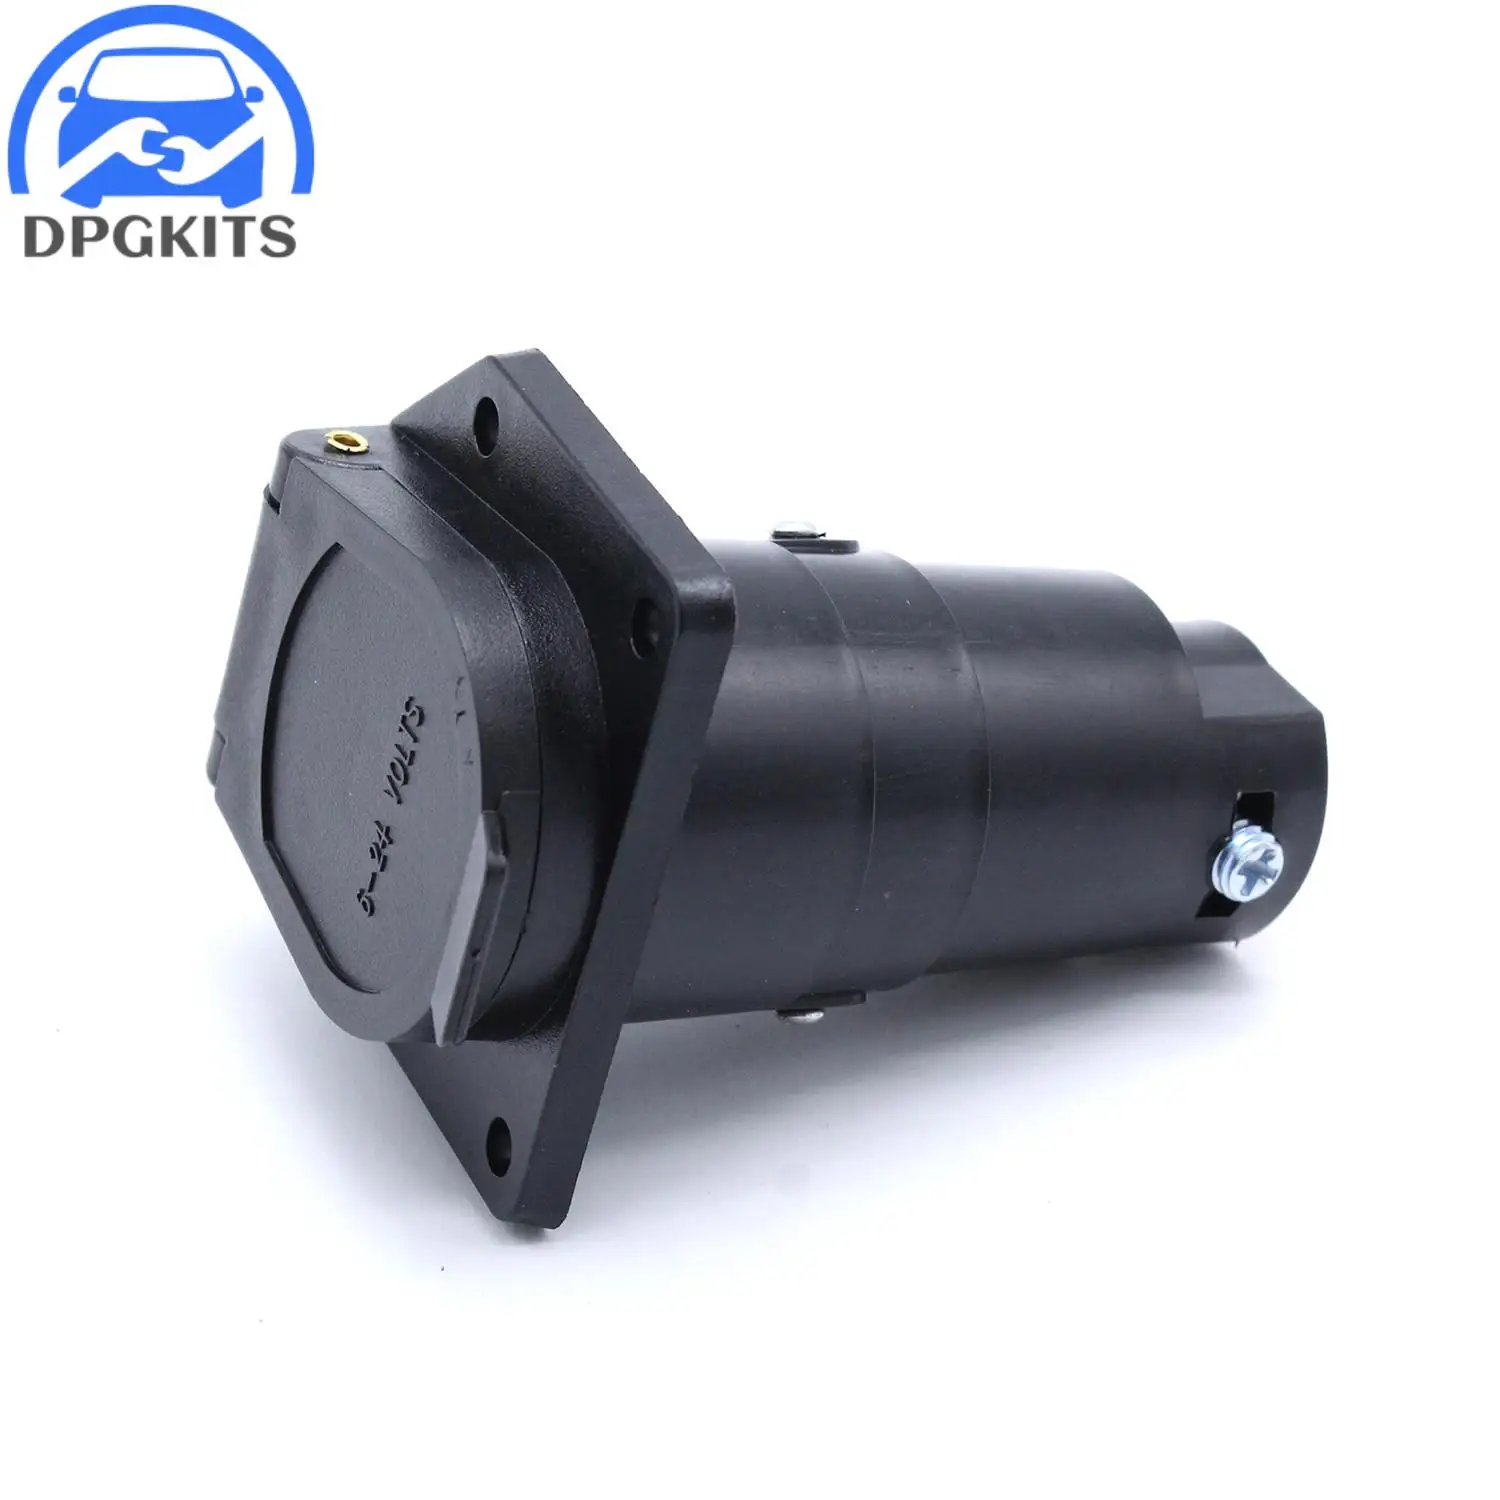 

12V 7 Pin Car Round Trailer Plug 7 Way Socket Adapter Wiring Connector For American With 3 Months Warranty